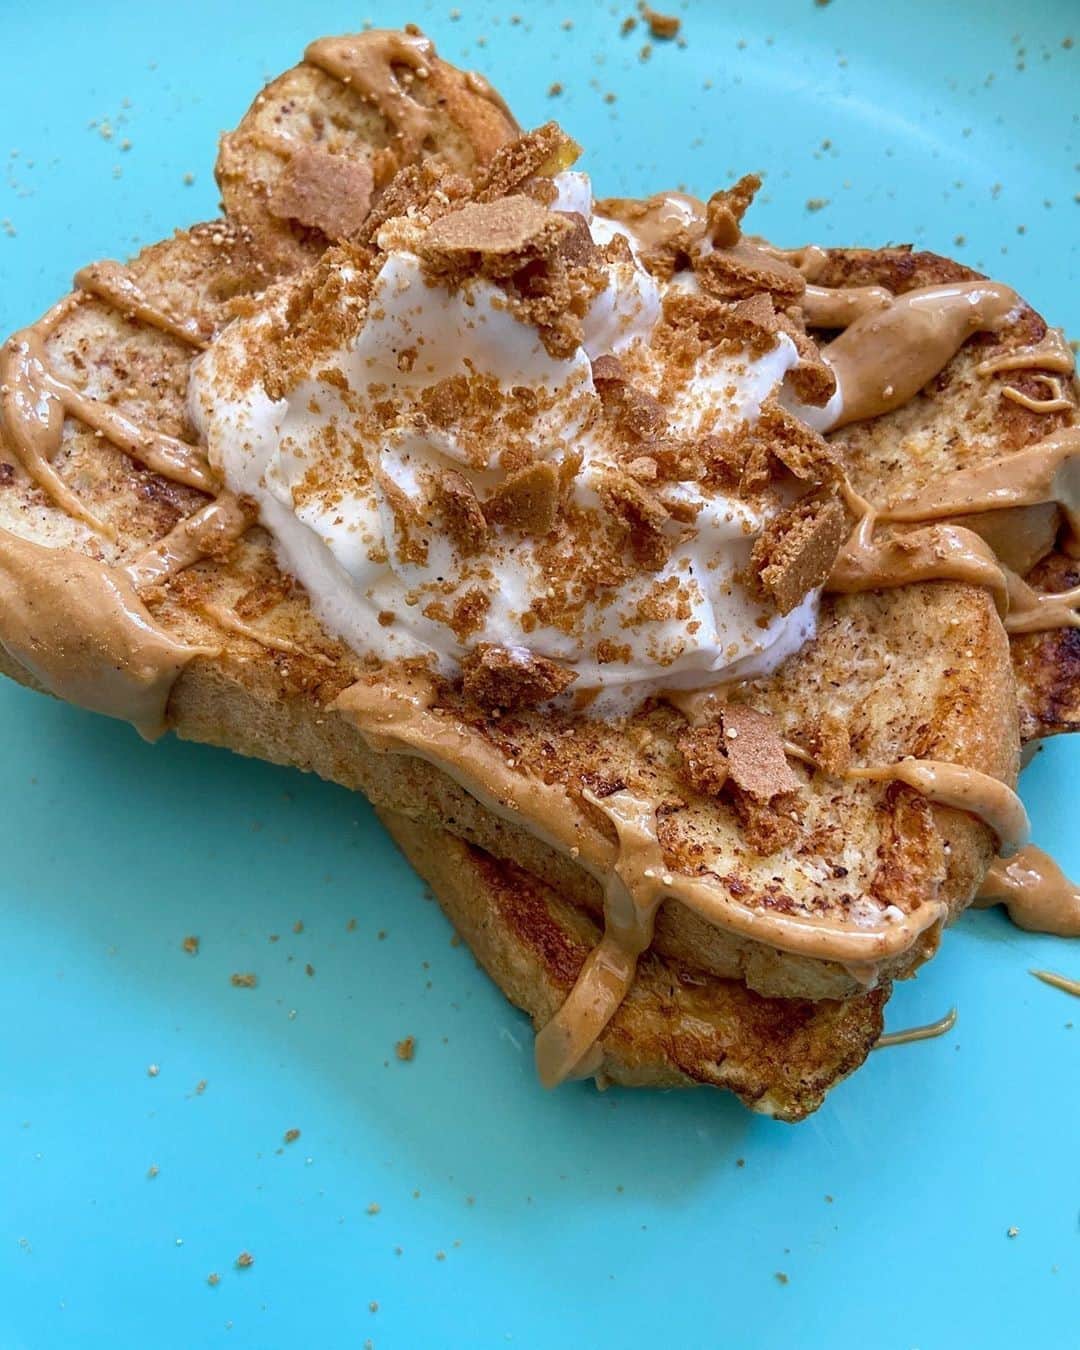 Flavorgod Seasoningsさんのインスタグラム写真 - (Flavorgod SeasoningsInstagram)「Pumpkin French toast!! Topped with Flavor God Buttery Cinnamon Roll⁠ -⁠ 🎥 @ww_thetrackingteacher⁠ -⁠ KETO friendly flavors available here ⬇️⁠ Click link in the bio -> @flavorgod⁠ www.flavorgod.com⁠ -⁠ 2 slices of 647 Bread (2sp)⁠ 1 egg⁠ splash of unsweetened almond milk⁠ @flavorgod Buttery Cinnamon Roll⁠ 1 tbsp of @americandreamnutbutter Cinnamon Toffee Crunch PB⁠ FF @reddiwip⁠ 2 Trader Joe’s Triple Ginger Cookie Thin (1sp) (I crumbled one and it was enough so I ate the other lol)⁠ ⁠ As I was finishing I thought about how amazingggg this would be with warm apples on top, so that’s definitely going to be added next time. These fall flavors blended perfectly together 😍⁠ -⁠ Flavor God Seasonings are:⁠ 💥 Zero Calories per Serving ⁠ 🙌 0 Sugar per Serving⁠ 🔥 #KETO & #PALEO Friendly⁠ 🌱 GLUTEN FREE & #KOSHER⁠ ☀️ VEGAN-FRIENDLY ⁠ 🌊 Low salt⁠ ⚡️ NO MSG⁠ 🚫 NO SOY⁠ 🥛 DAIRY FREE *except Ranch ⁠ 🌿 All Natural & Made Fresh⁠ ⏰ Shelf life is 24 months⁠ -⁠ #food #foodie #flavorgod #seasonings #glutenfree #mealprep #seasonings #breakfast #lunch #dinner #yummy #delicious #foodporn」9月26日 21時01分 - flavorgod